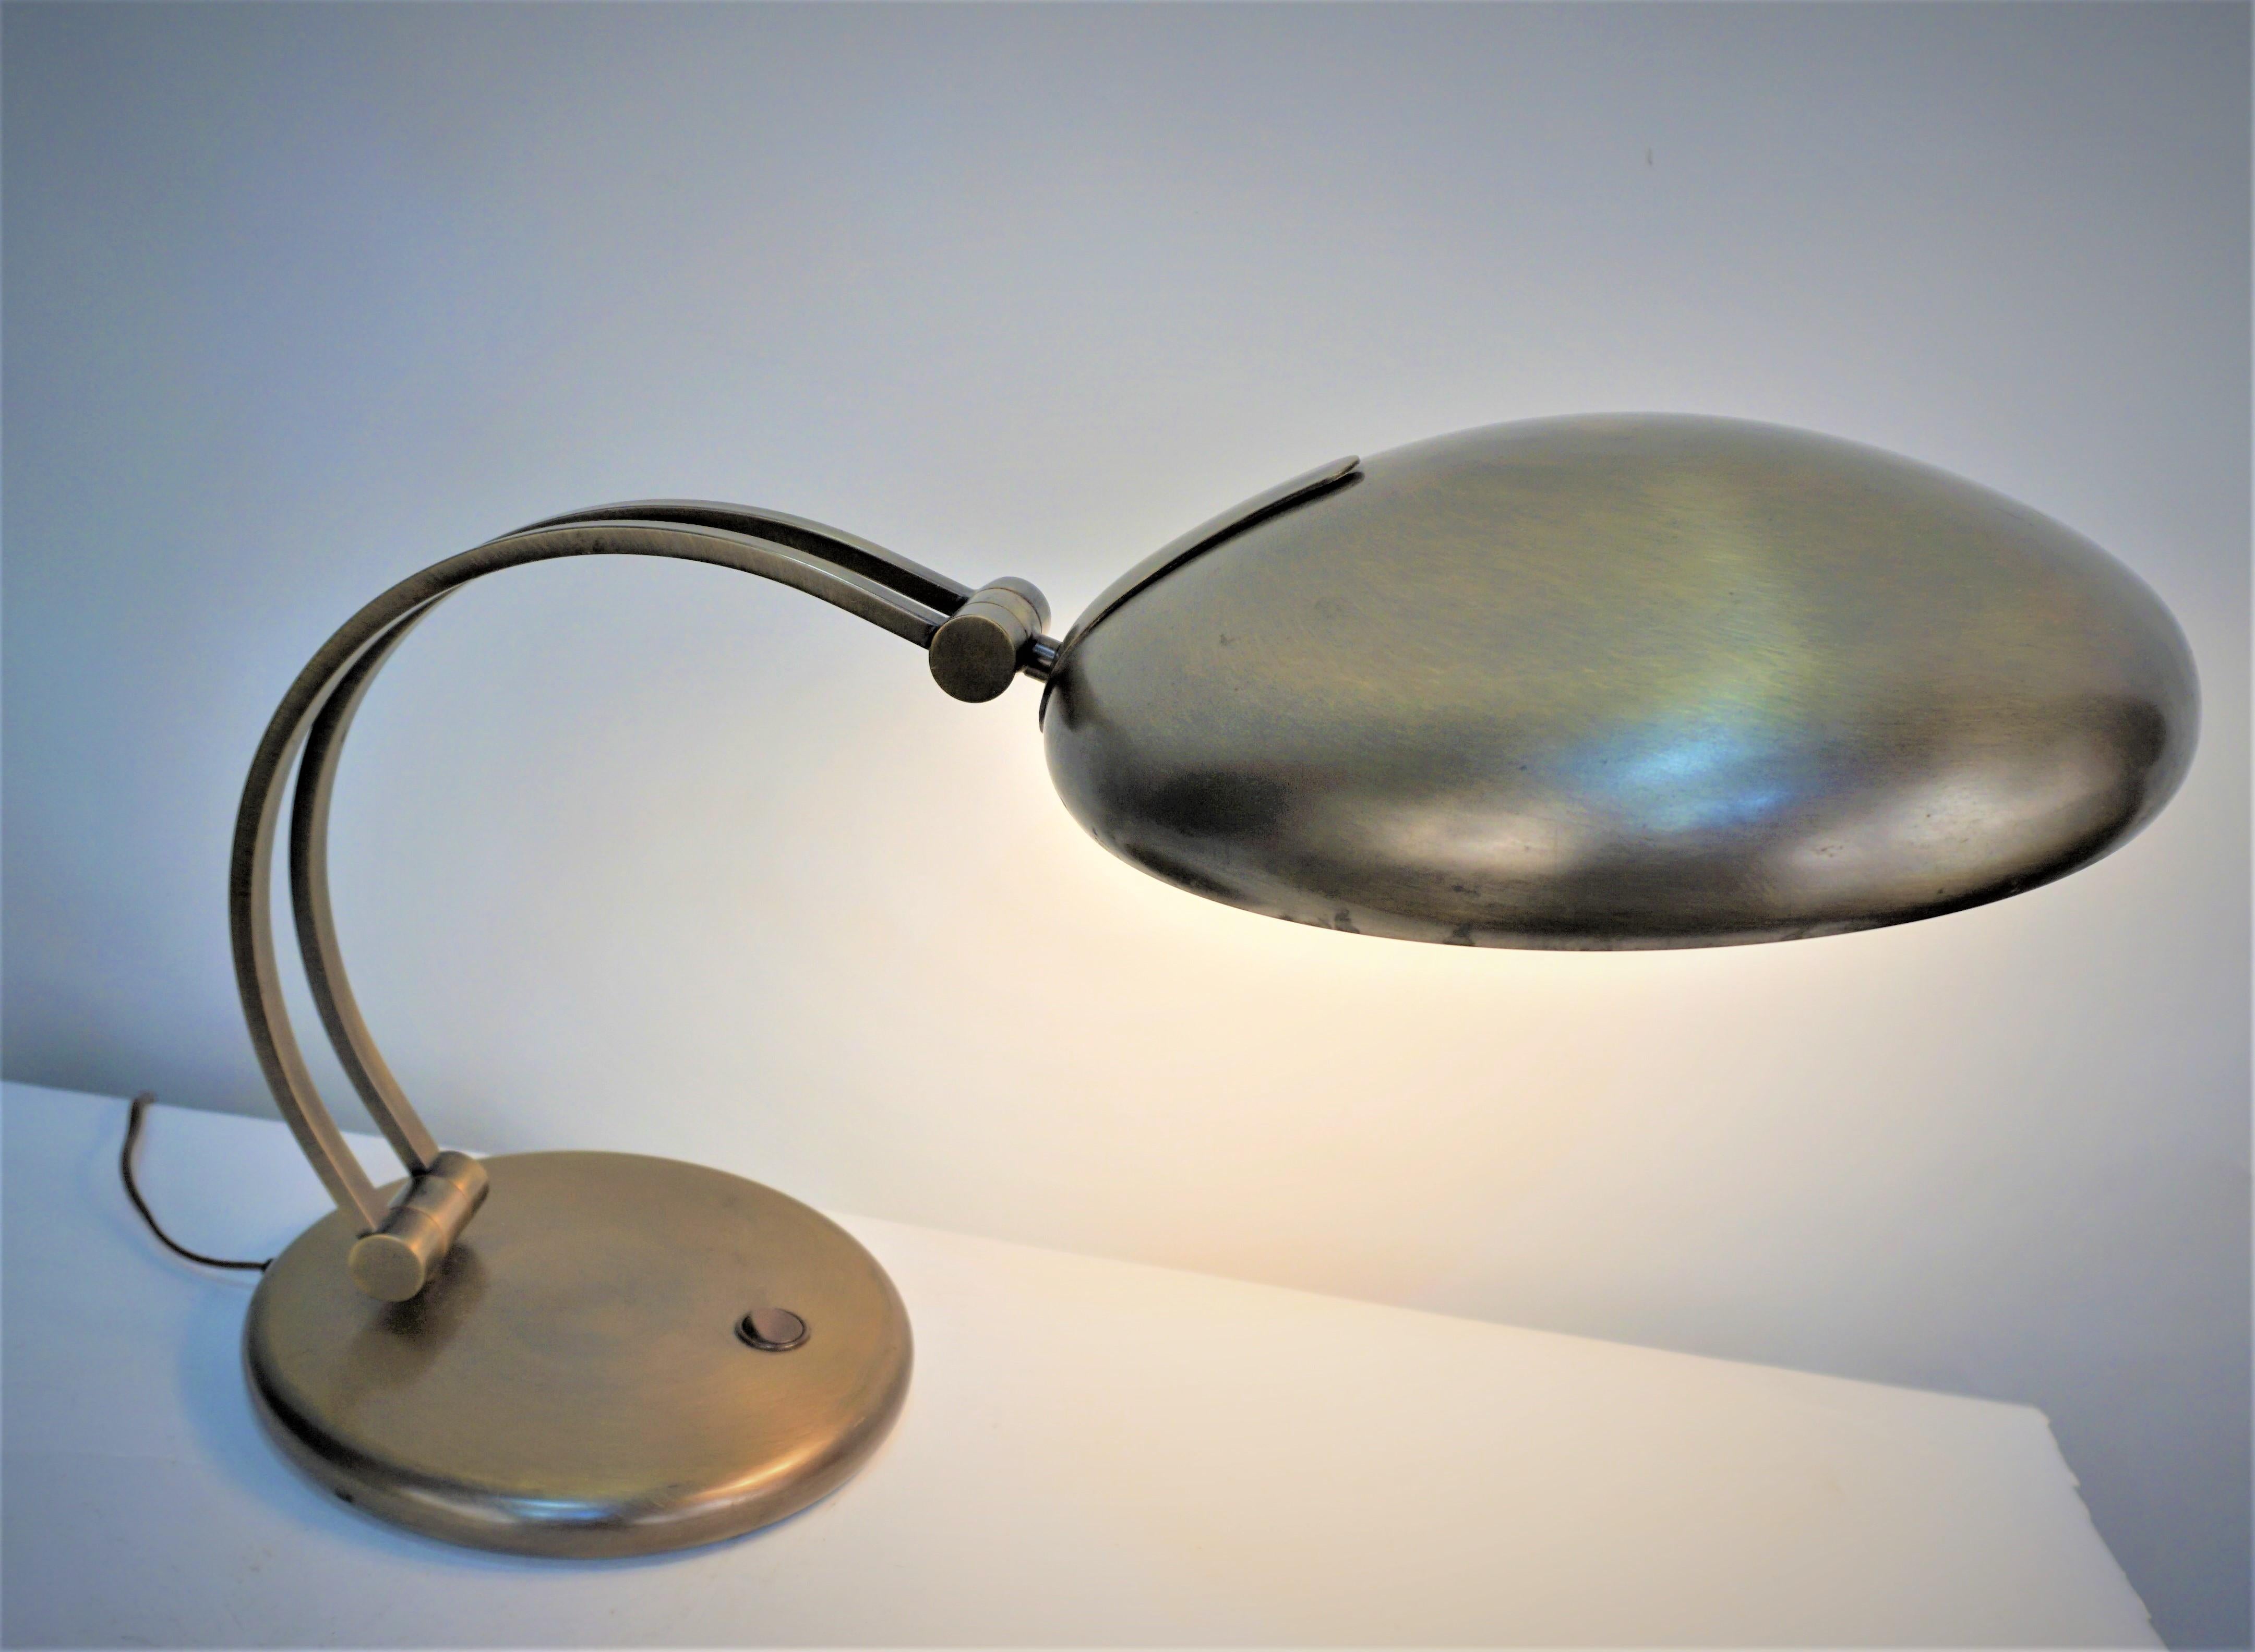 Bronze adjustable height arm and shade desk lamps.
Meaurement can't be prefect due adjusting arm.